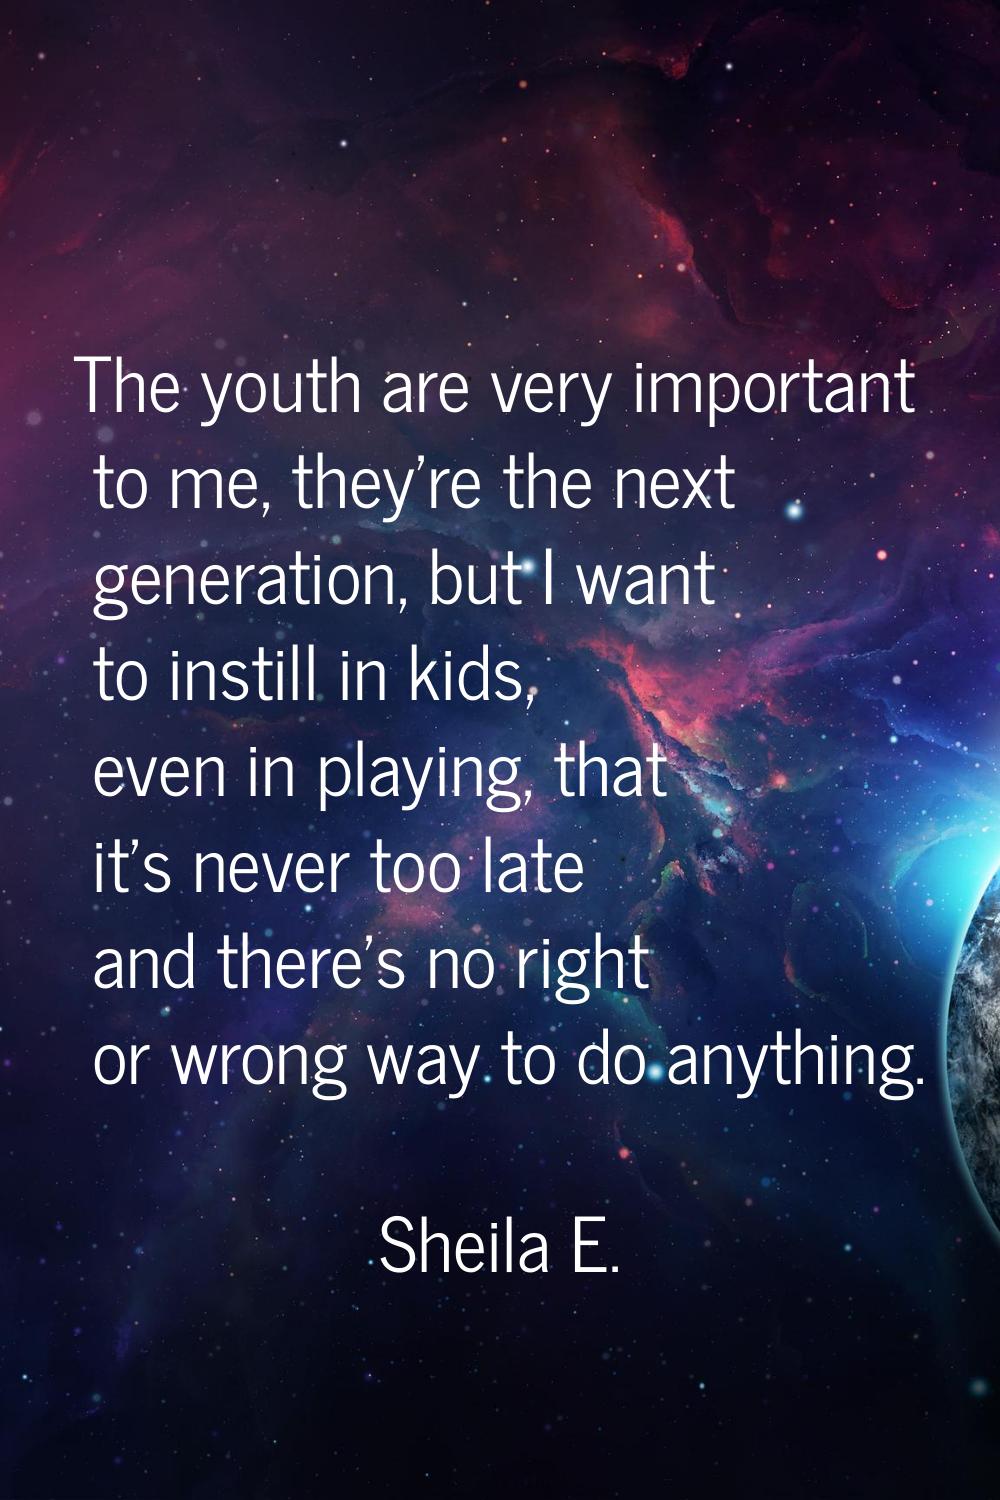 The youth are very important to me, they're the next generation, but I want to instill in kids, eve